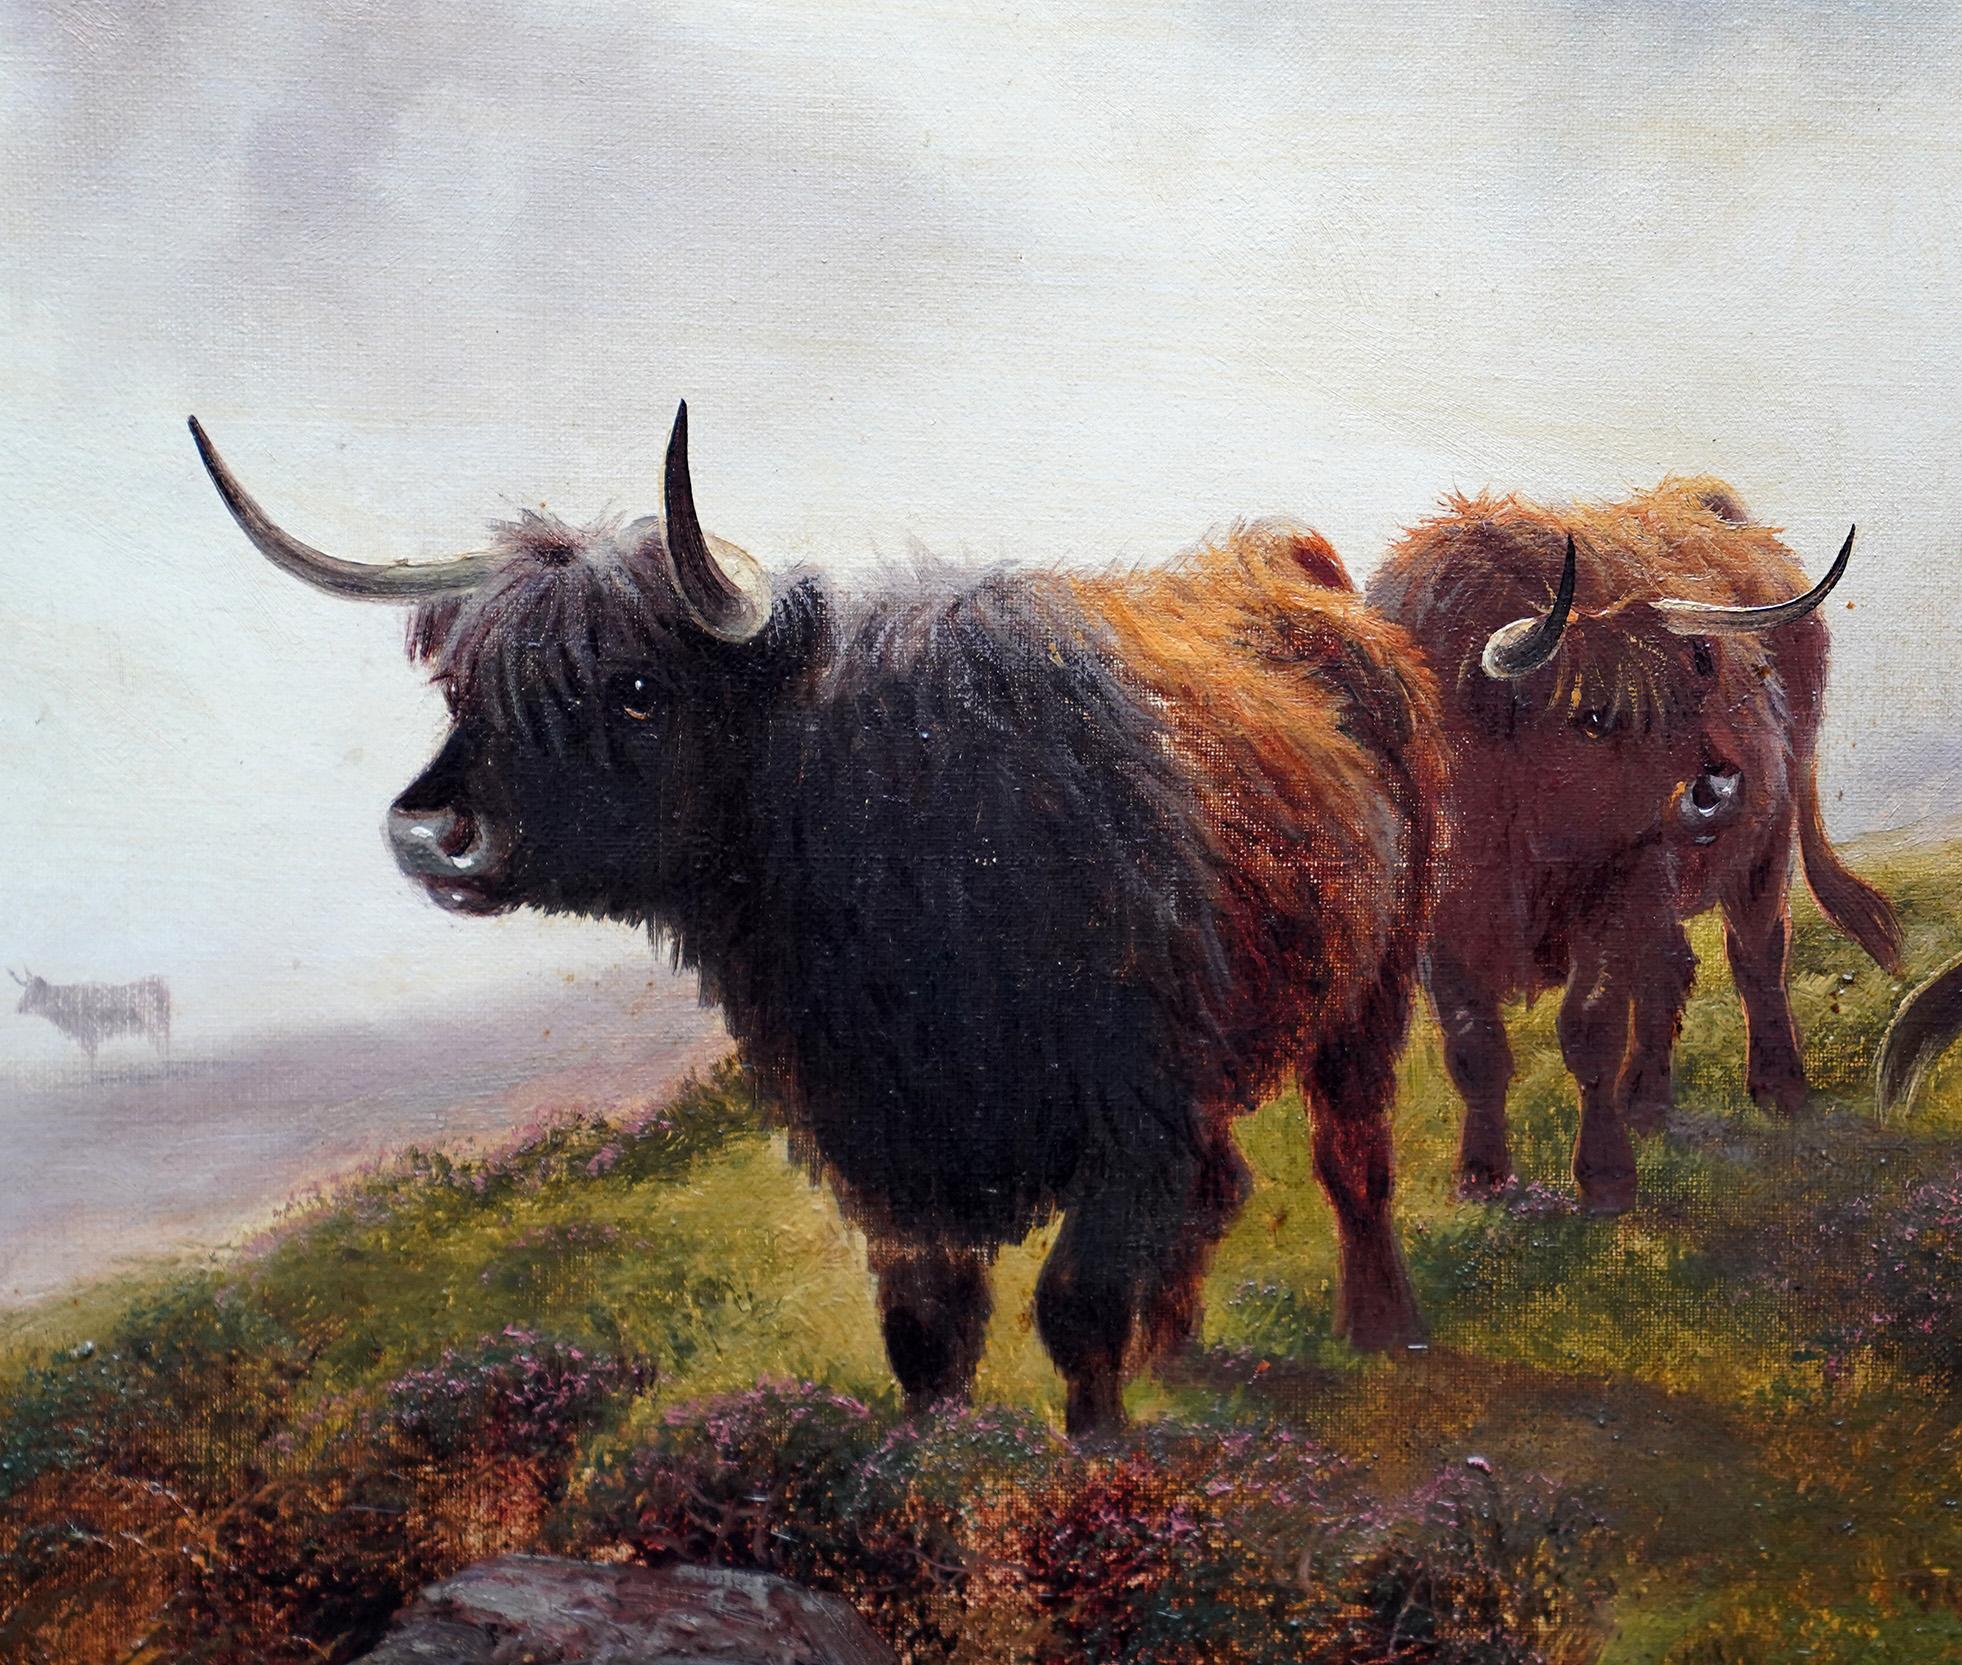 This superb British Victorian animal landscape oil painting is by noted artist Henry Robinson Hall. Famous for his paintings of Highland cattle, it was painted circa 1895 and is a large oil on canvas of long horned Highland cattle by a stream on a